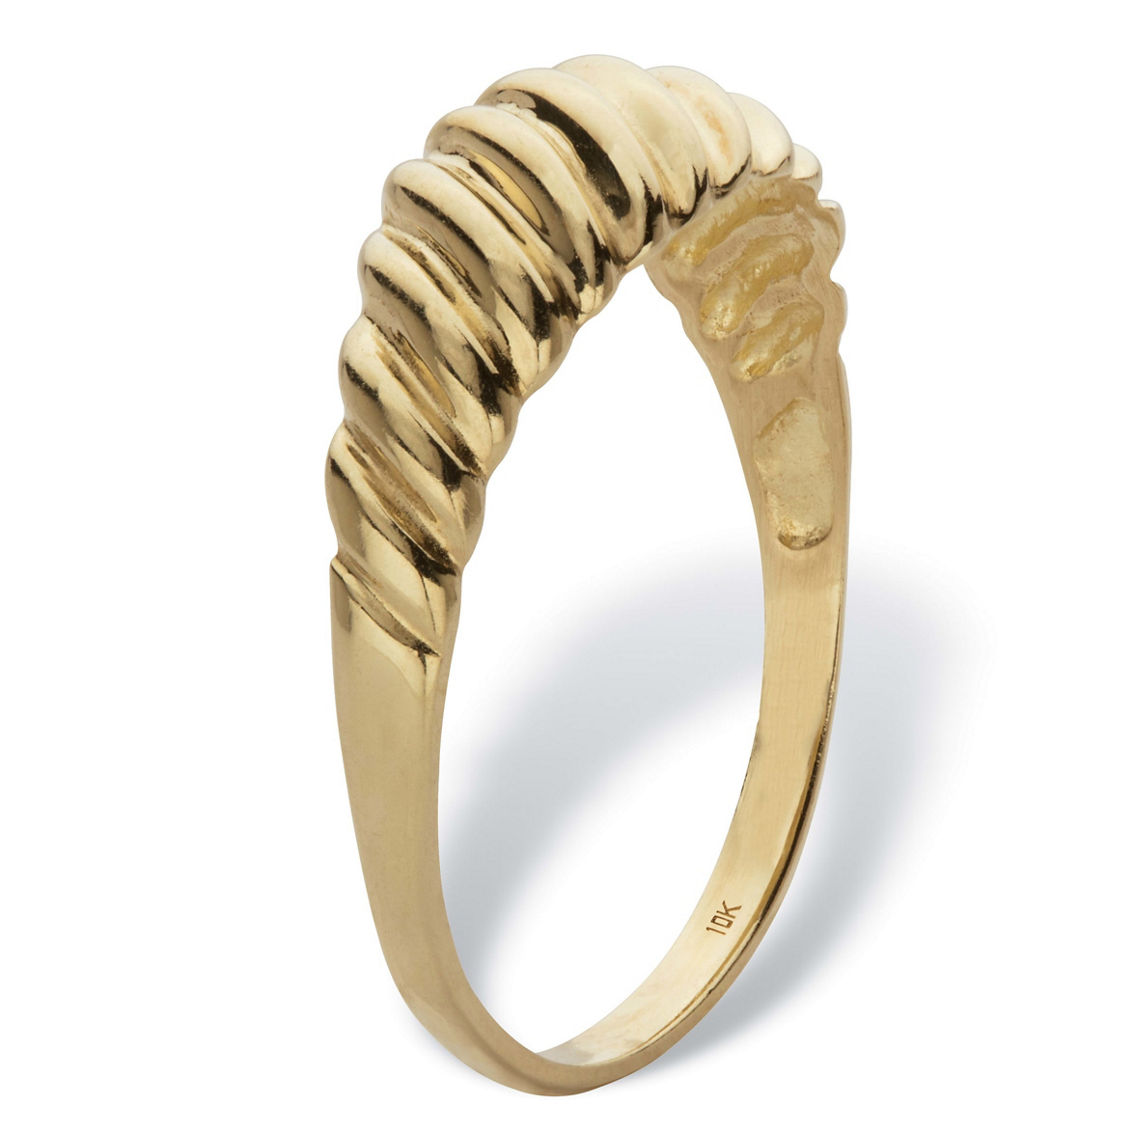 PalmBeach Polished Solid 10k Yellow Gold Shrimp-Style Ring - Image 2 of 5